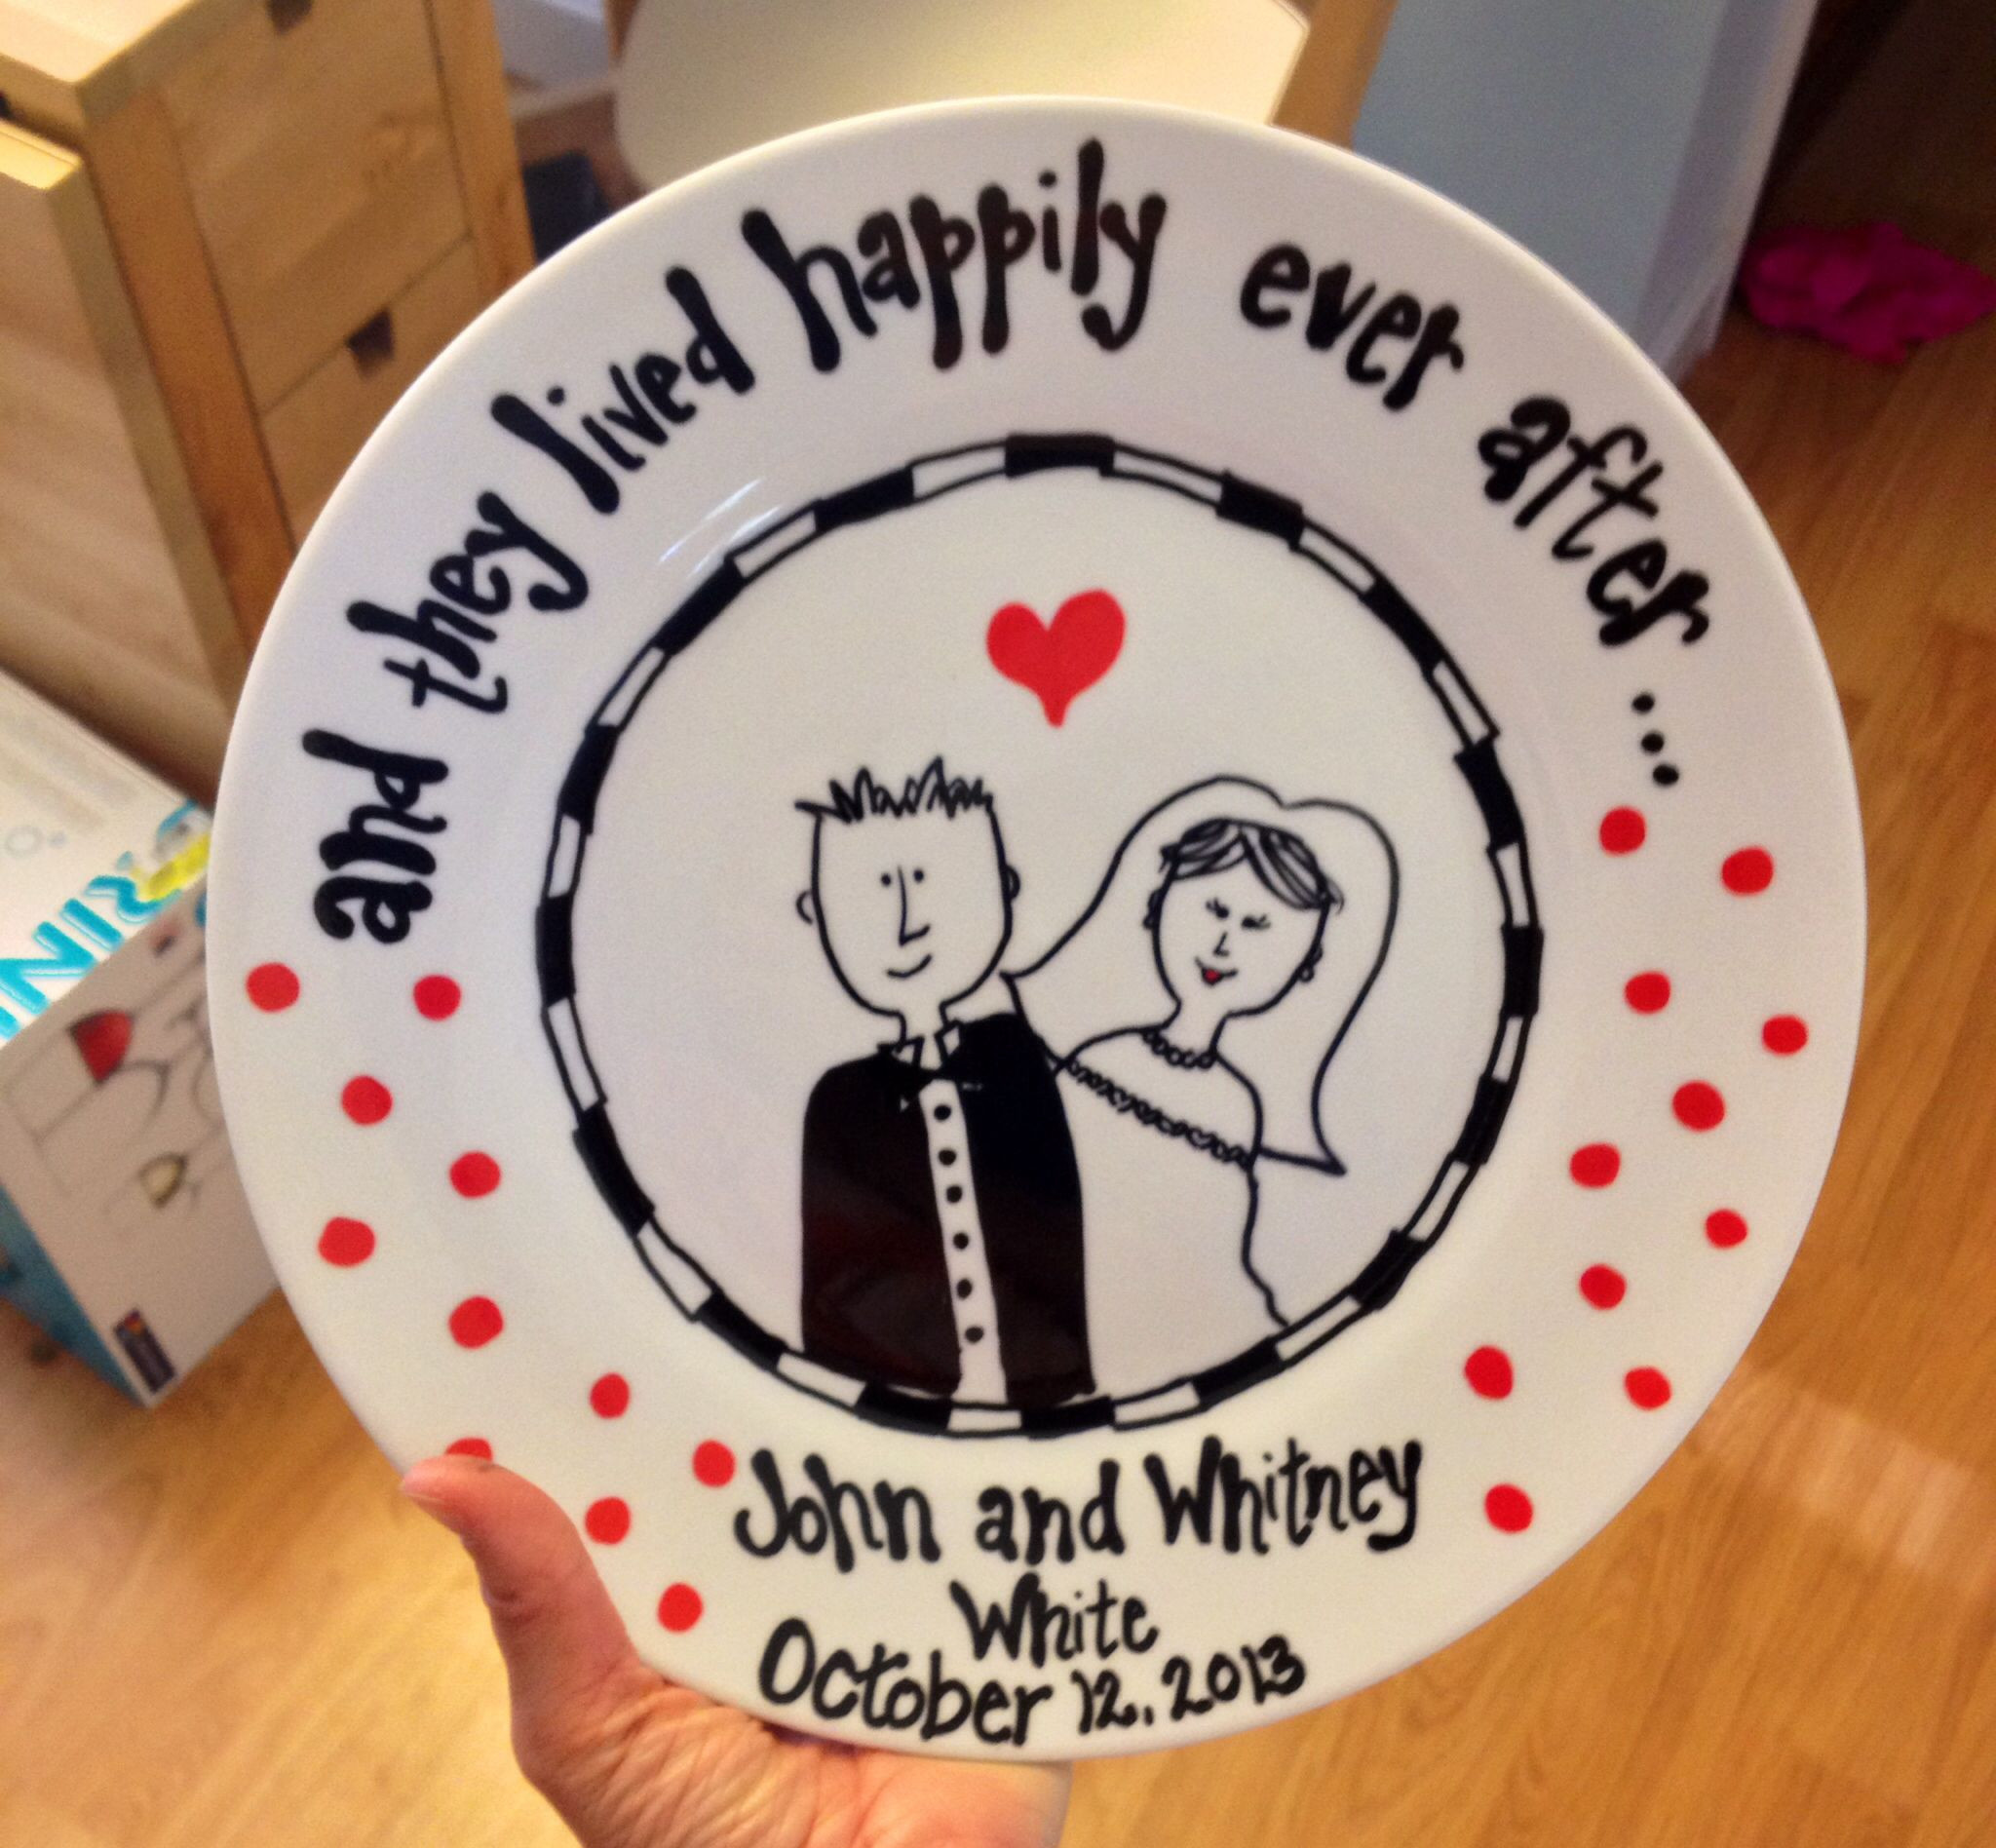 DIY Wedding Gift Ideas For Bride And Groom
 Wedding t would be cute DIY from kids